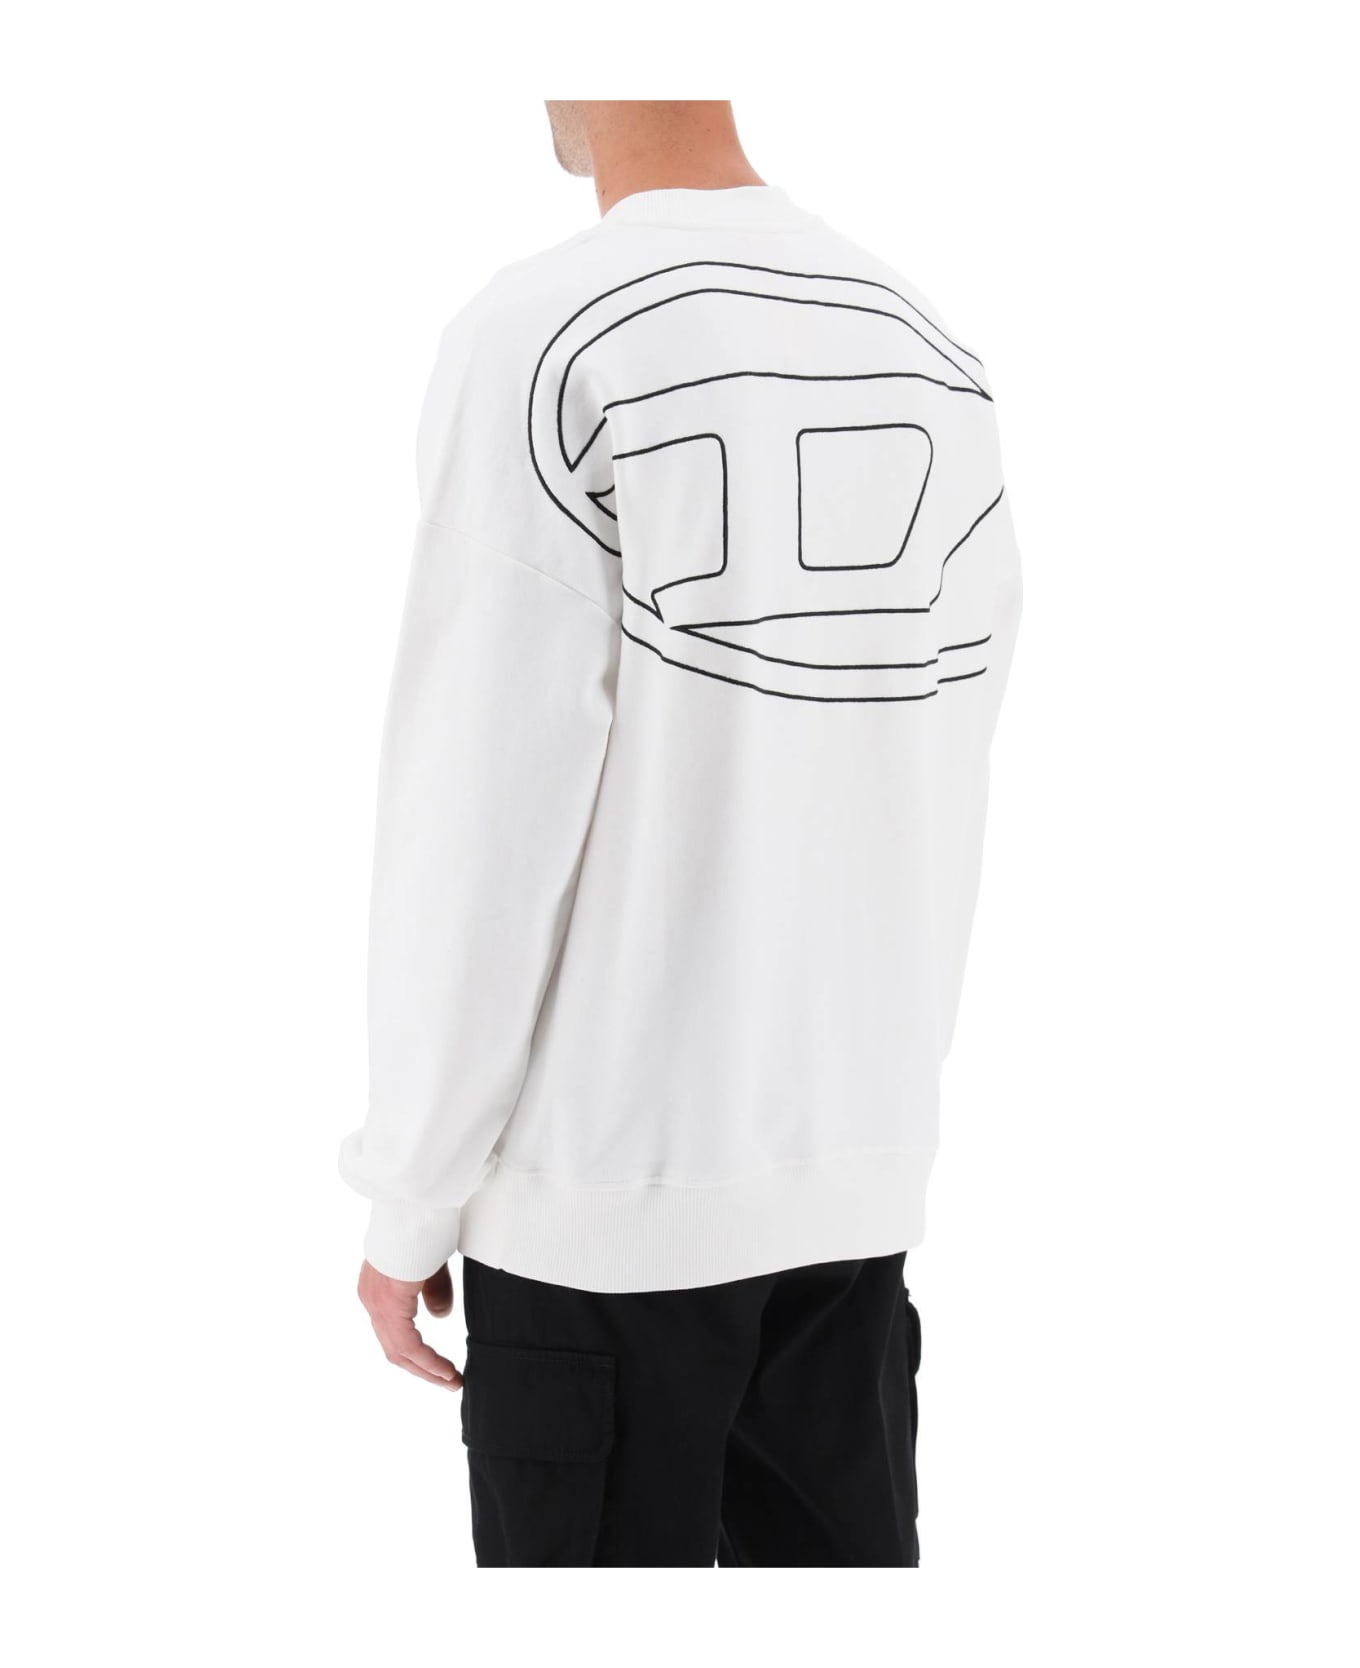 Diesel 's-rob-megoval' Sweatshirt With Maxi Oval-d Logo Embroidery - White